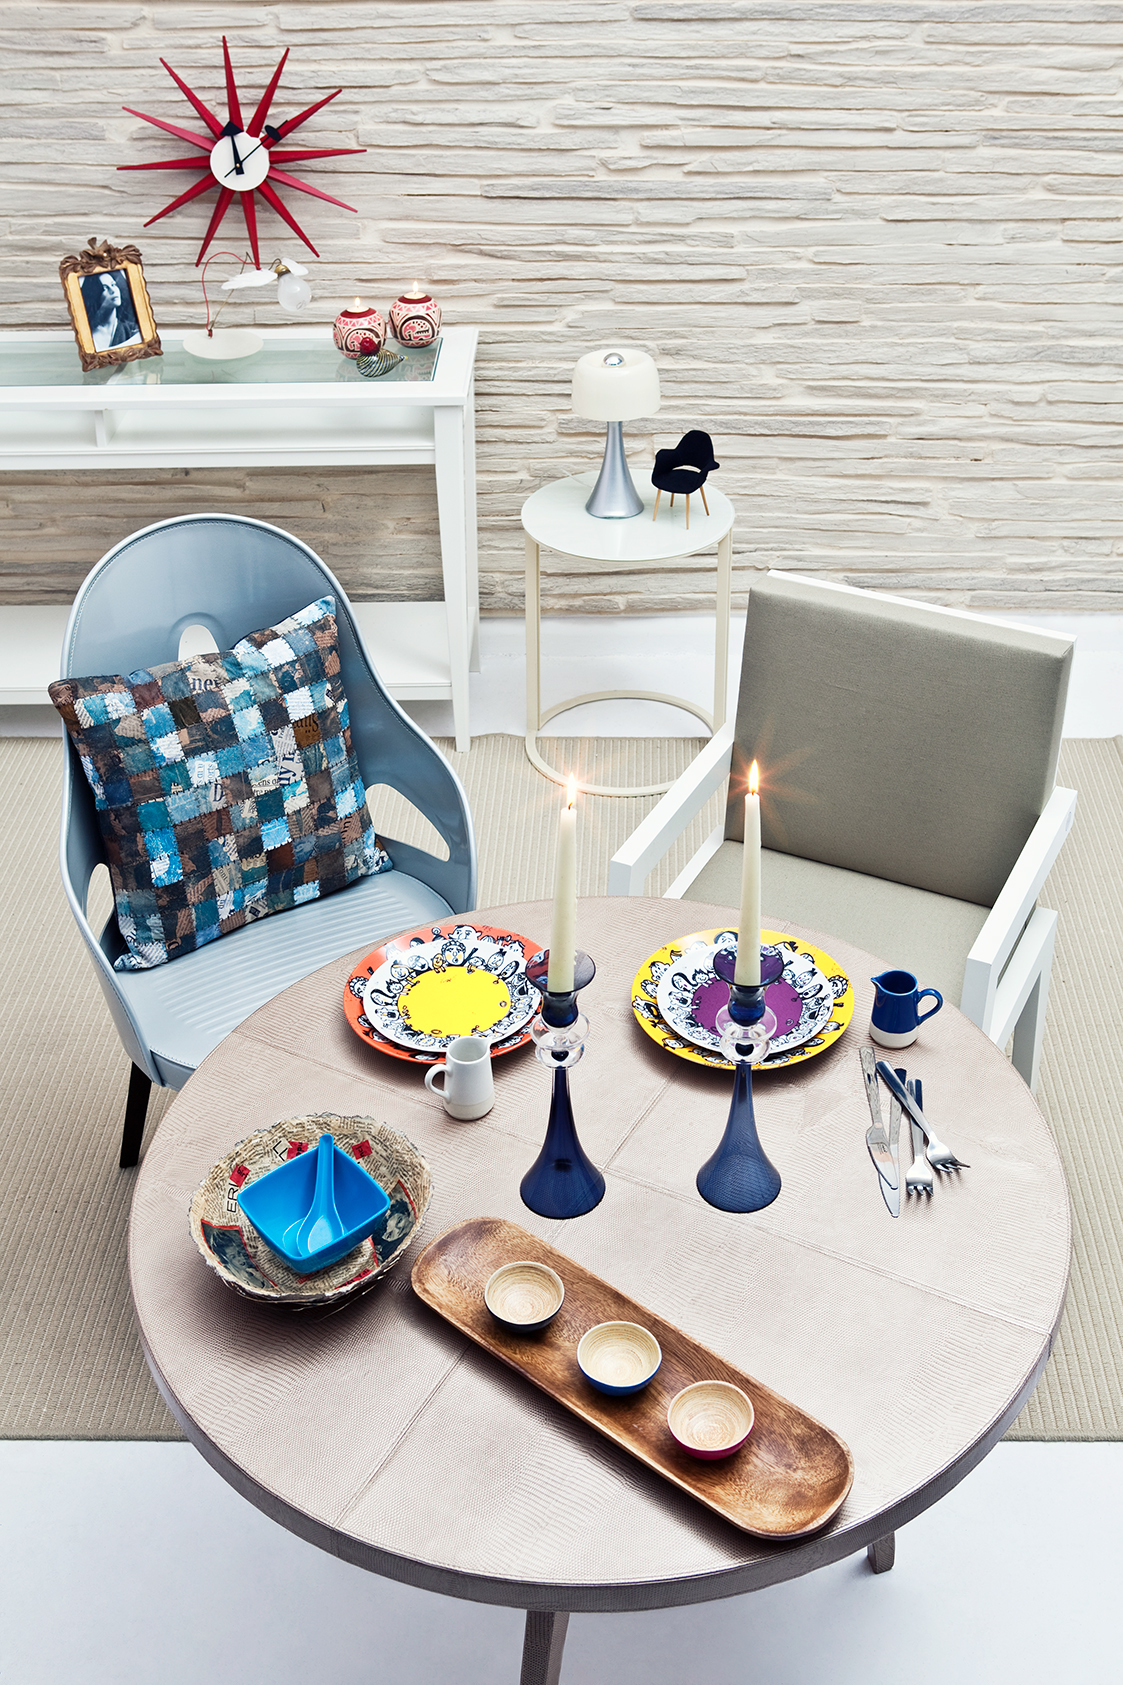 magazines Interior furniture light retouch colors still life product Coach table candel room house provance pop